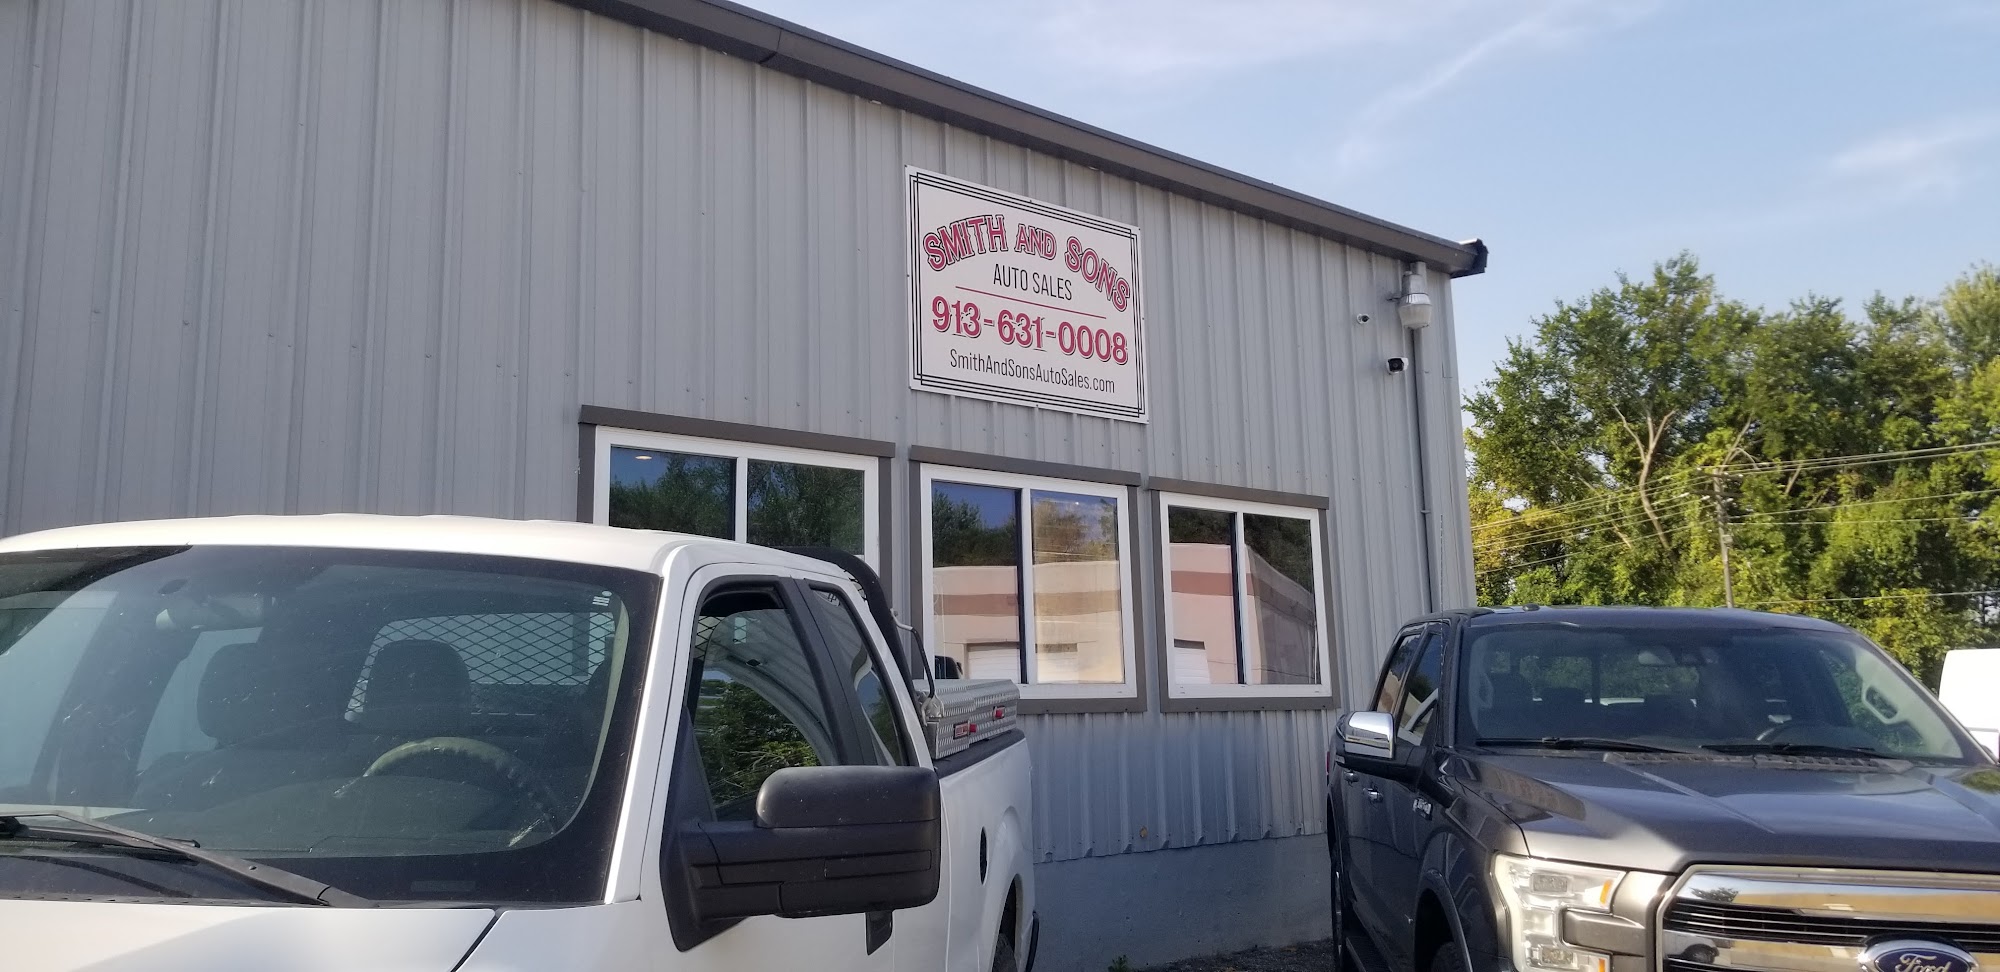 Smith And Sons Auto Sales